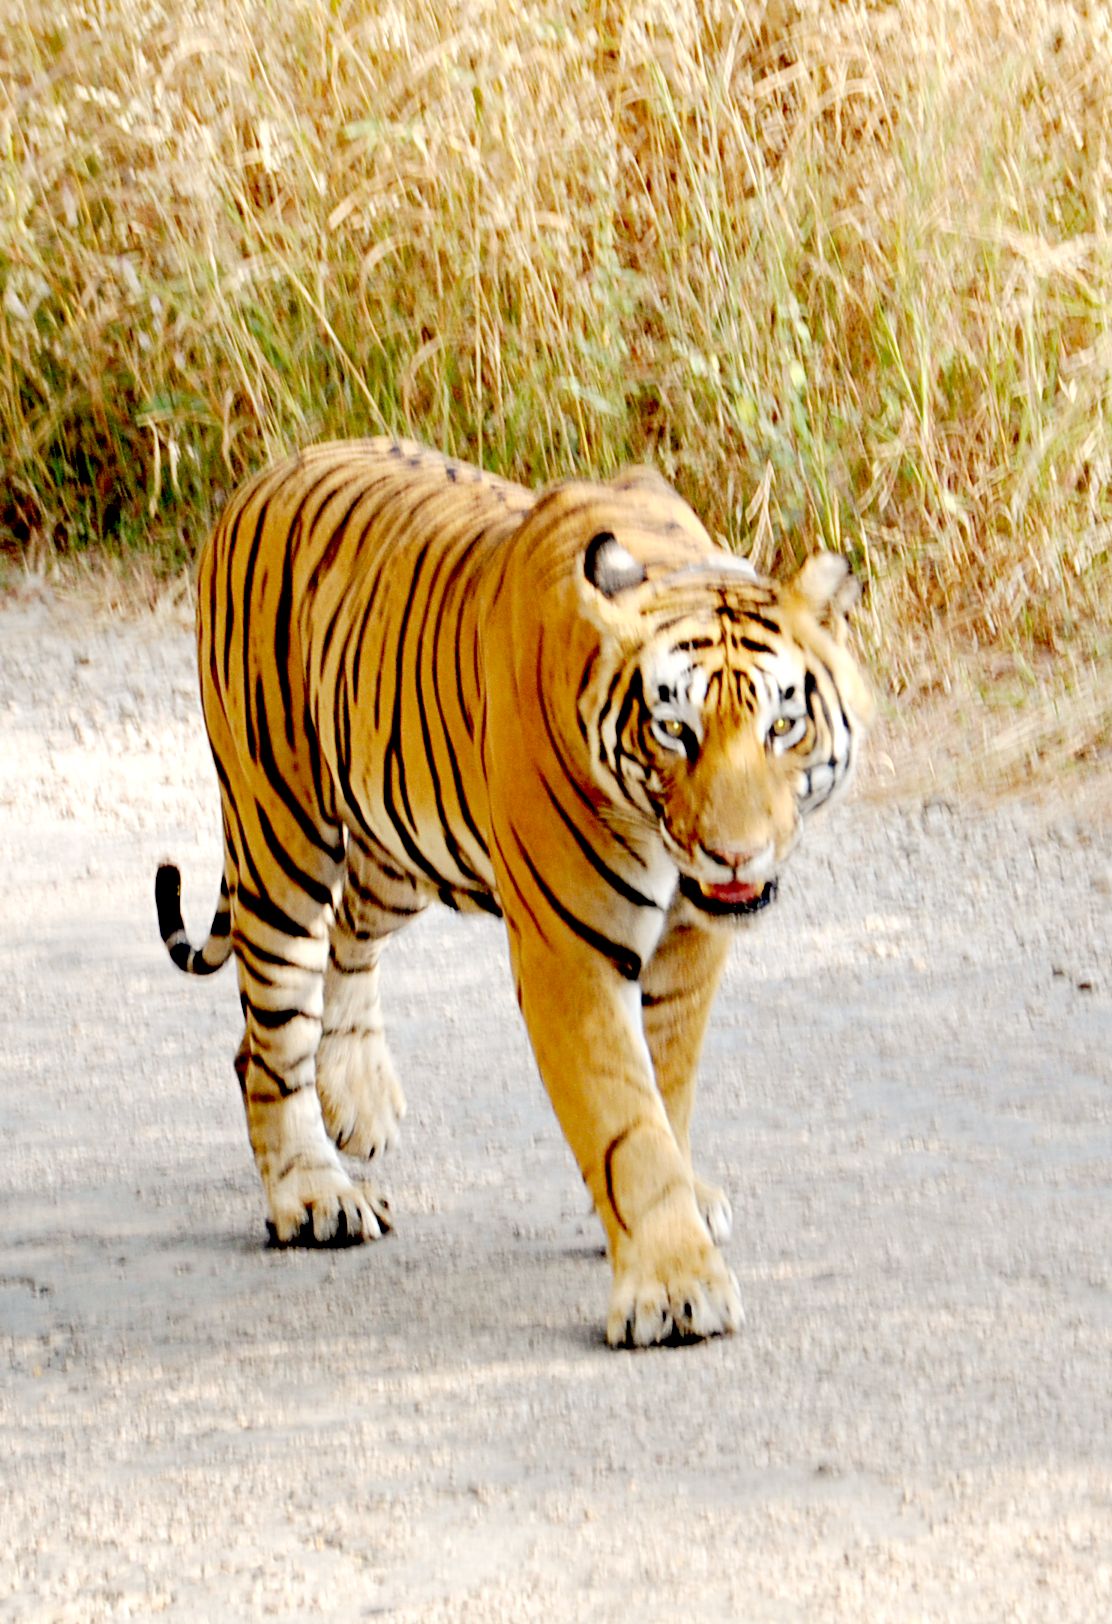 Finding a tiger to become a camera in Sariska